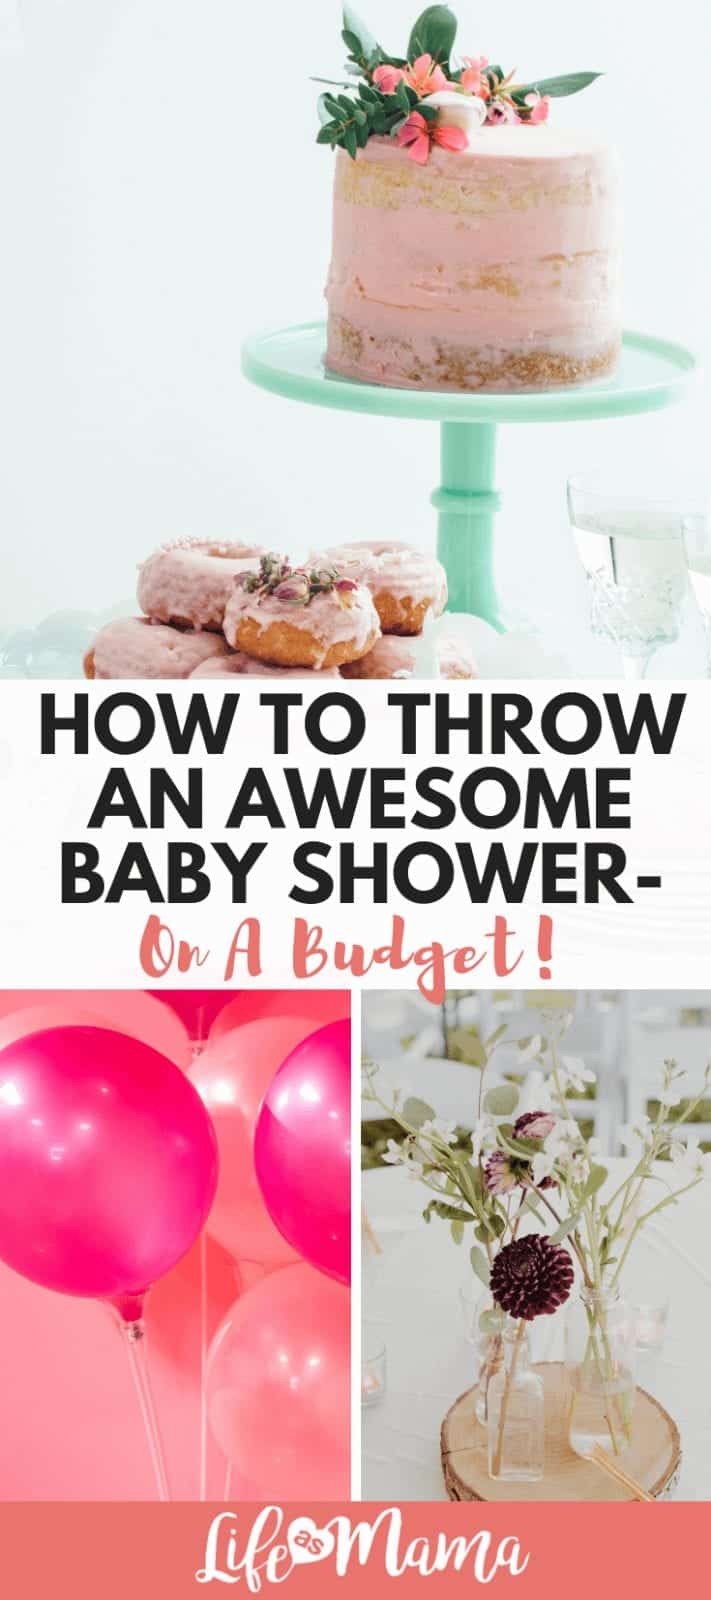 How To Throw An Awesome Baby Shower-On A Budget!